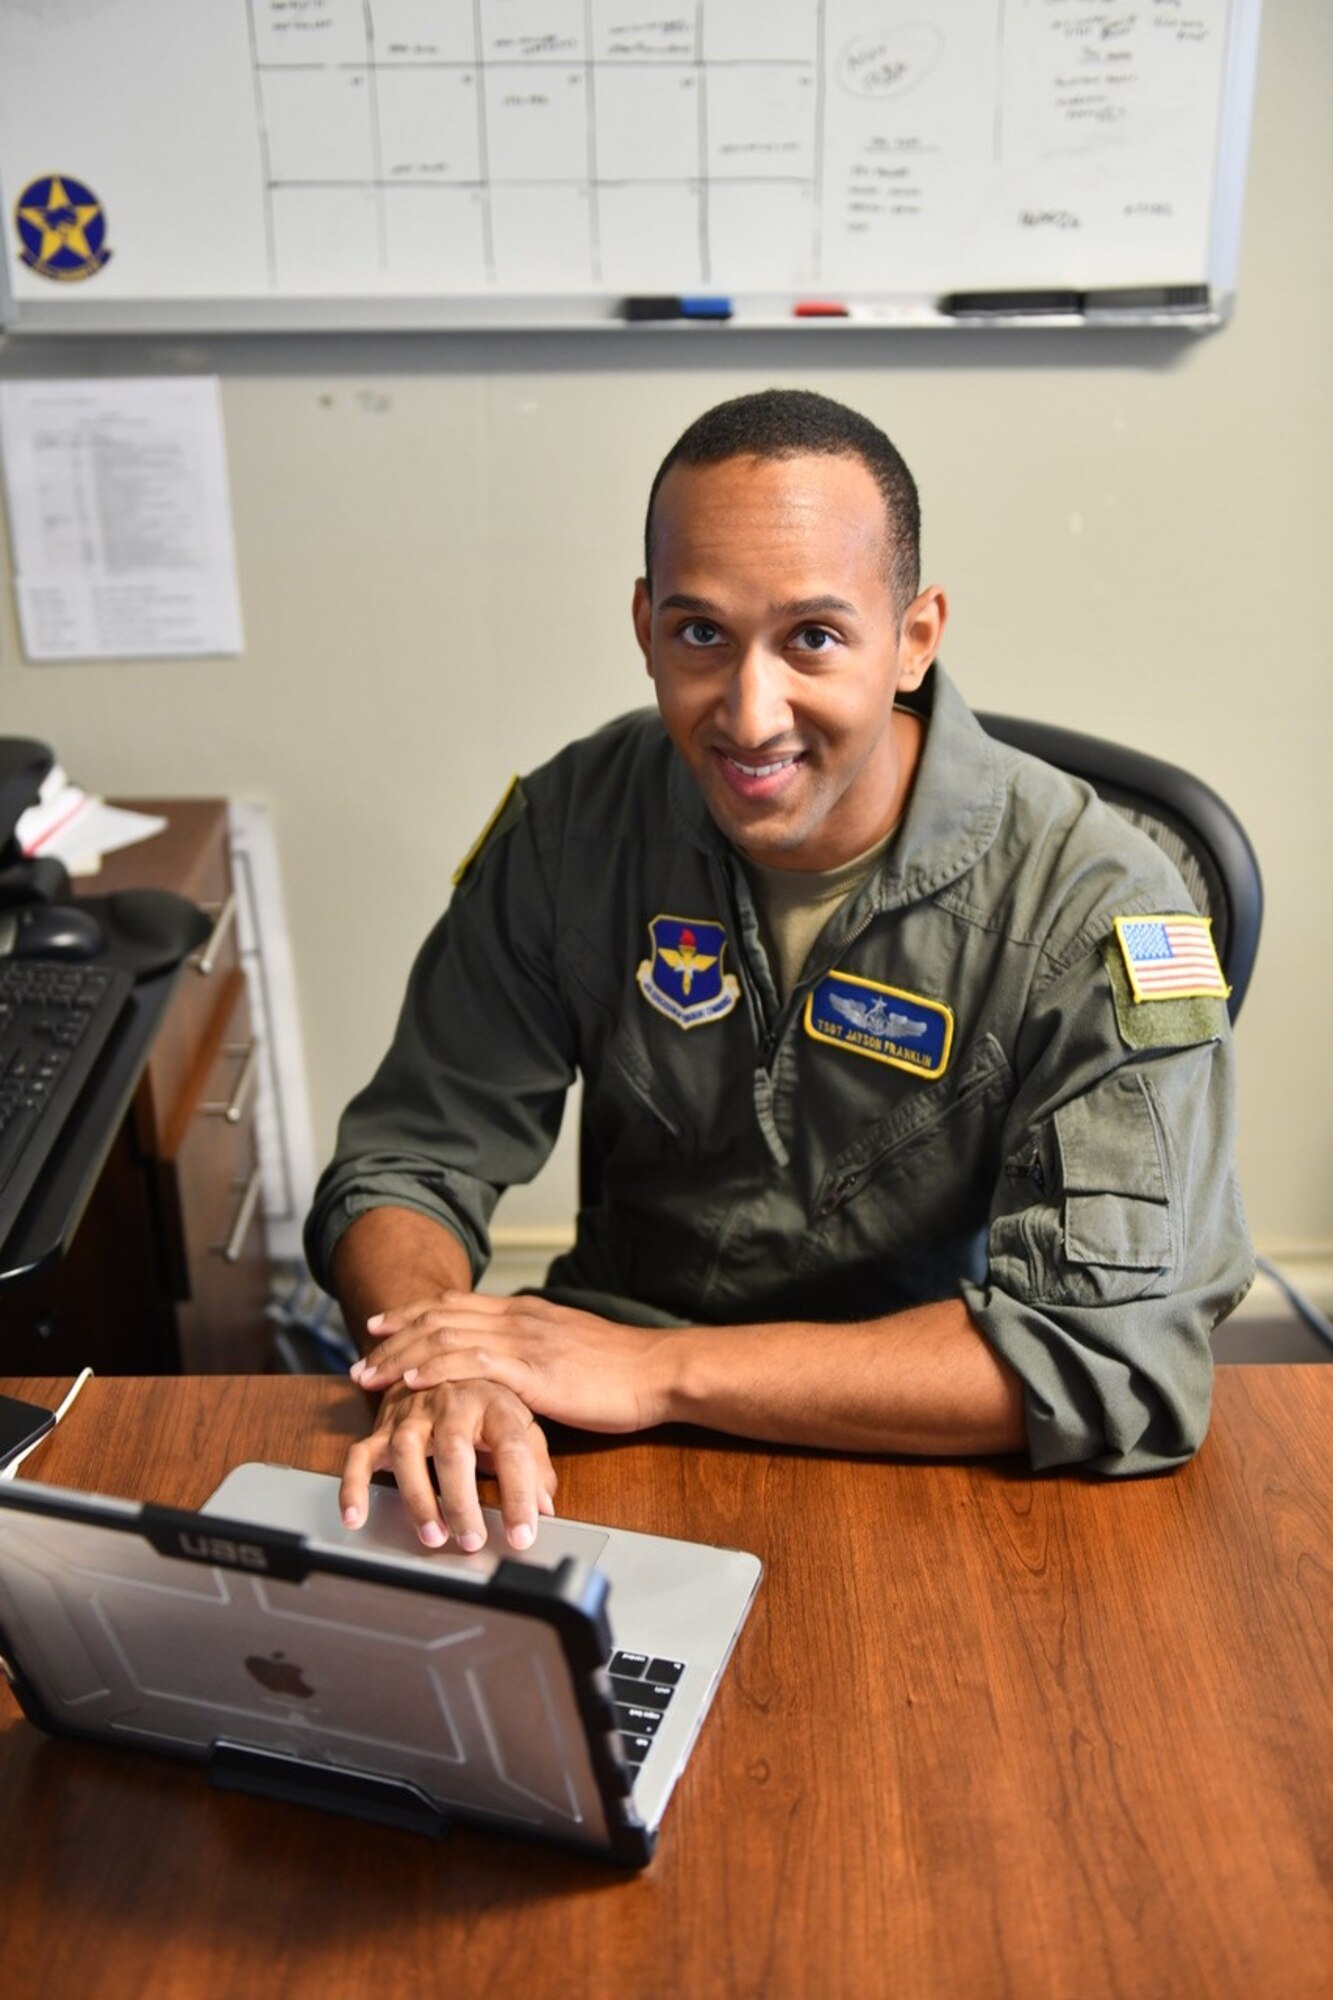 U.S. Air Force Tech. Sgt. Jayson Franklin, 311th Training Squadron Arabic academic training advisor, poses for a photo in his squadron building at Presidio of Monterey, Calif., July 20, 2022. Franklin’s efforts contribute to the academic success of 150 Airmen at any given time. (U.S. Air Force photo by Leonardo Carrillo)